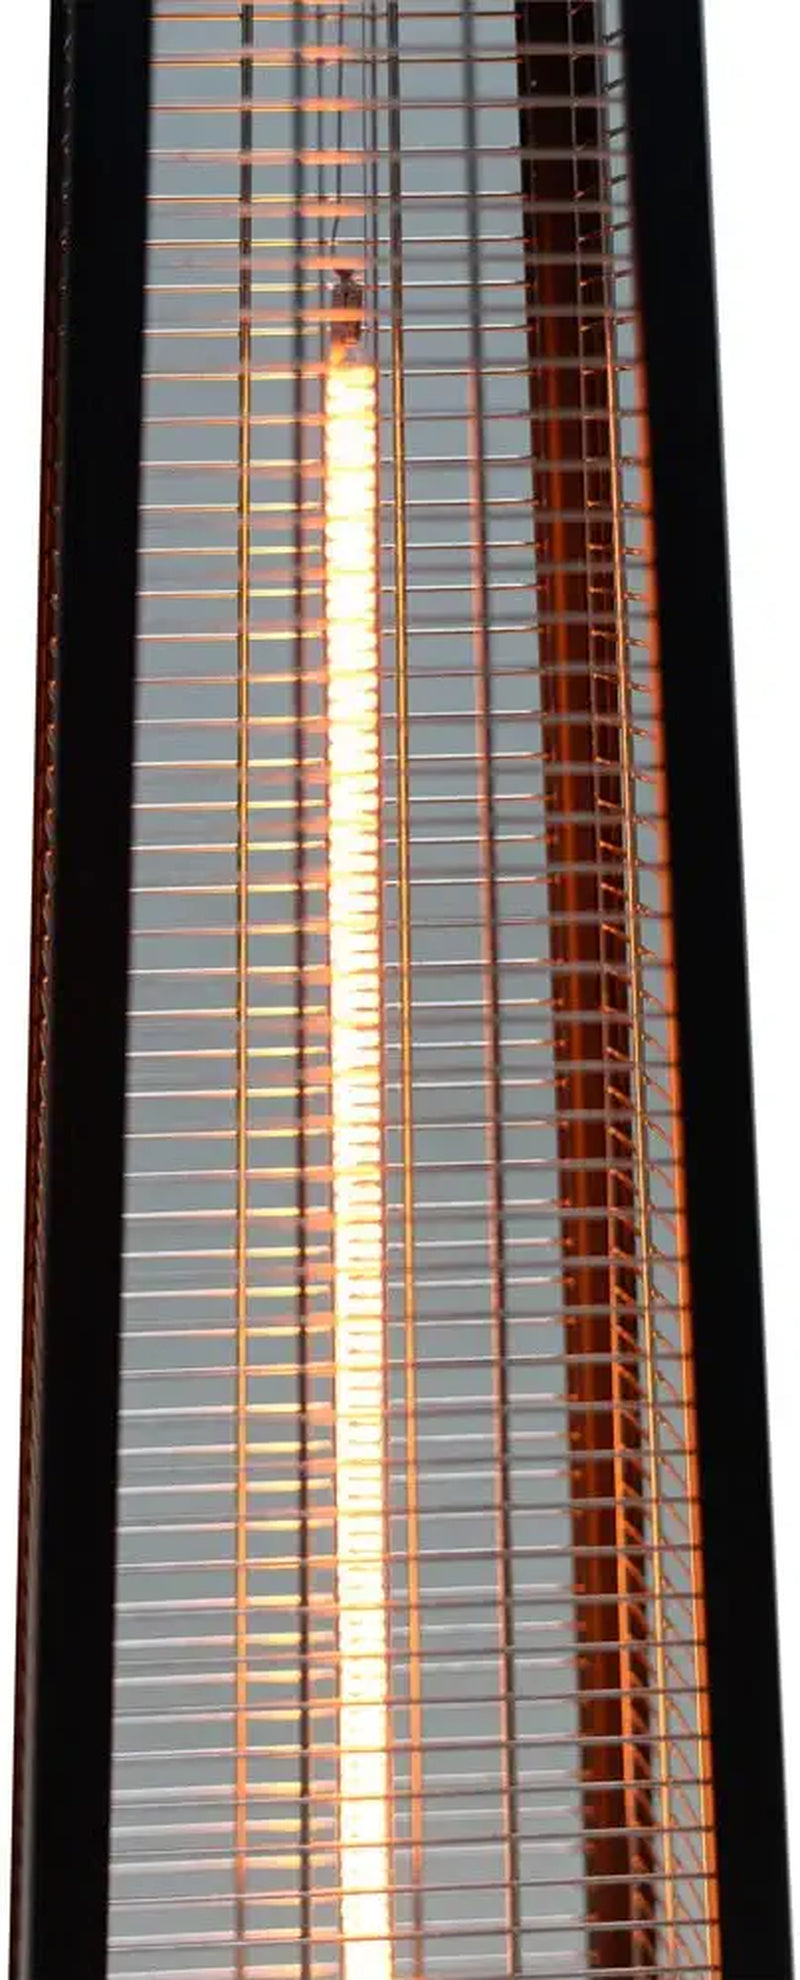 Hanover 31.5 In. Outdoor Infrared Electric Heater | Warms up to 122 Sq. Ft. | 1500 Watts | Modern Heater Perfect for Patios, Porches, Garages, and Workshops | Black